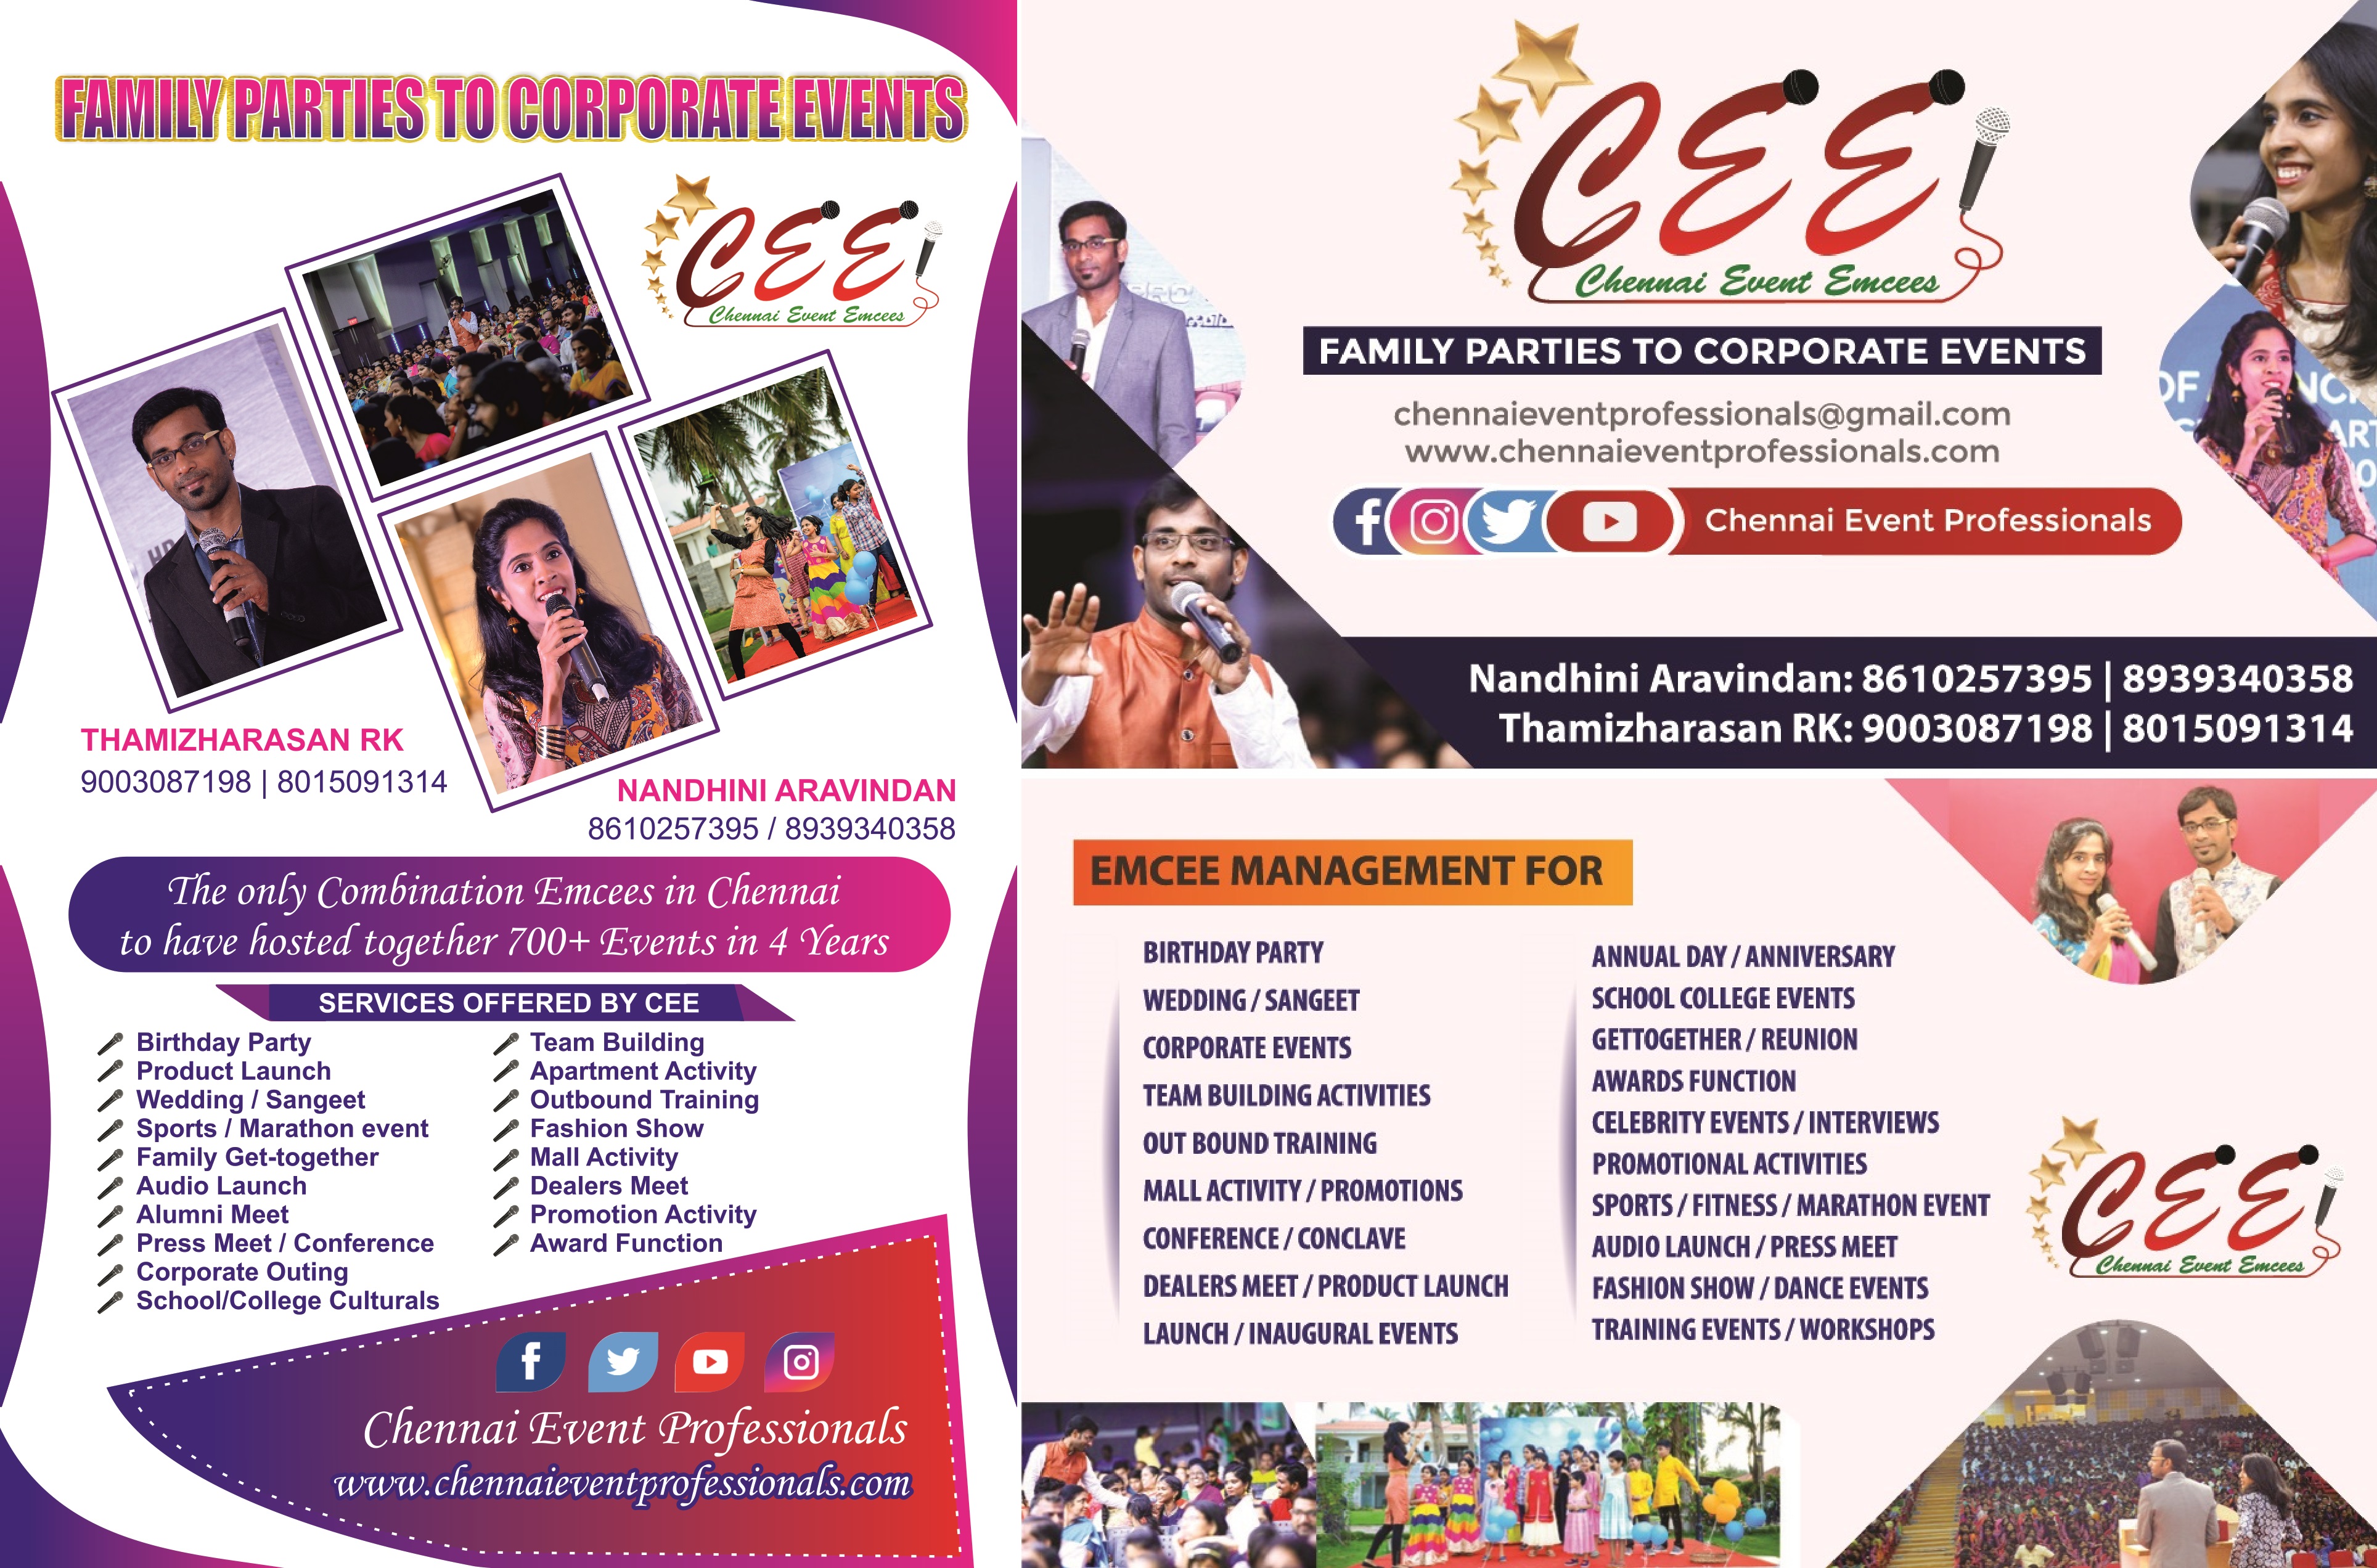 Chennai Event Emcees Entertainers and Professionals Thamizharasan and Nandhini A Contact